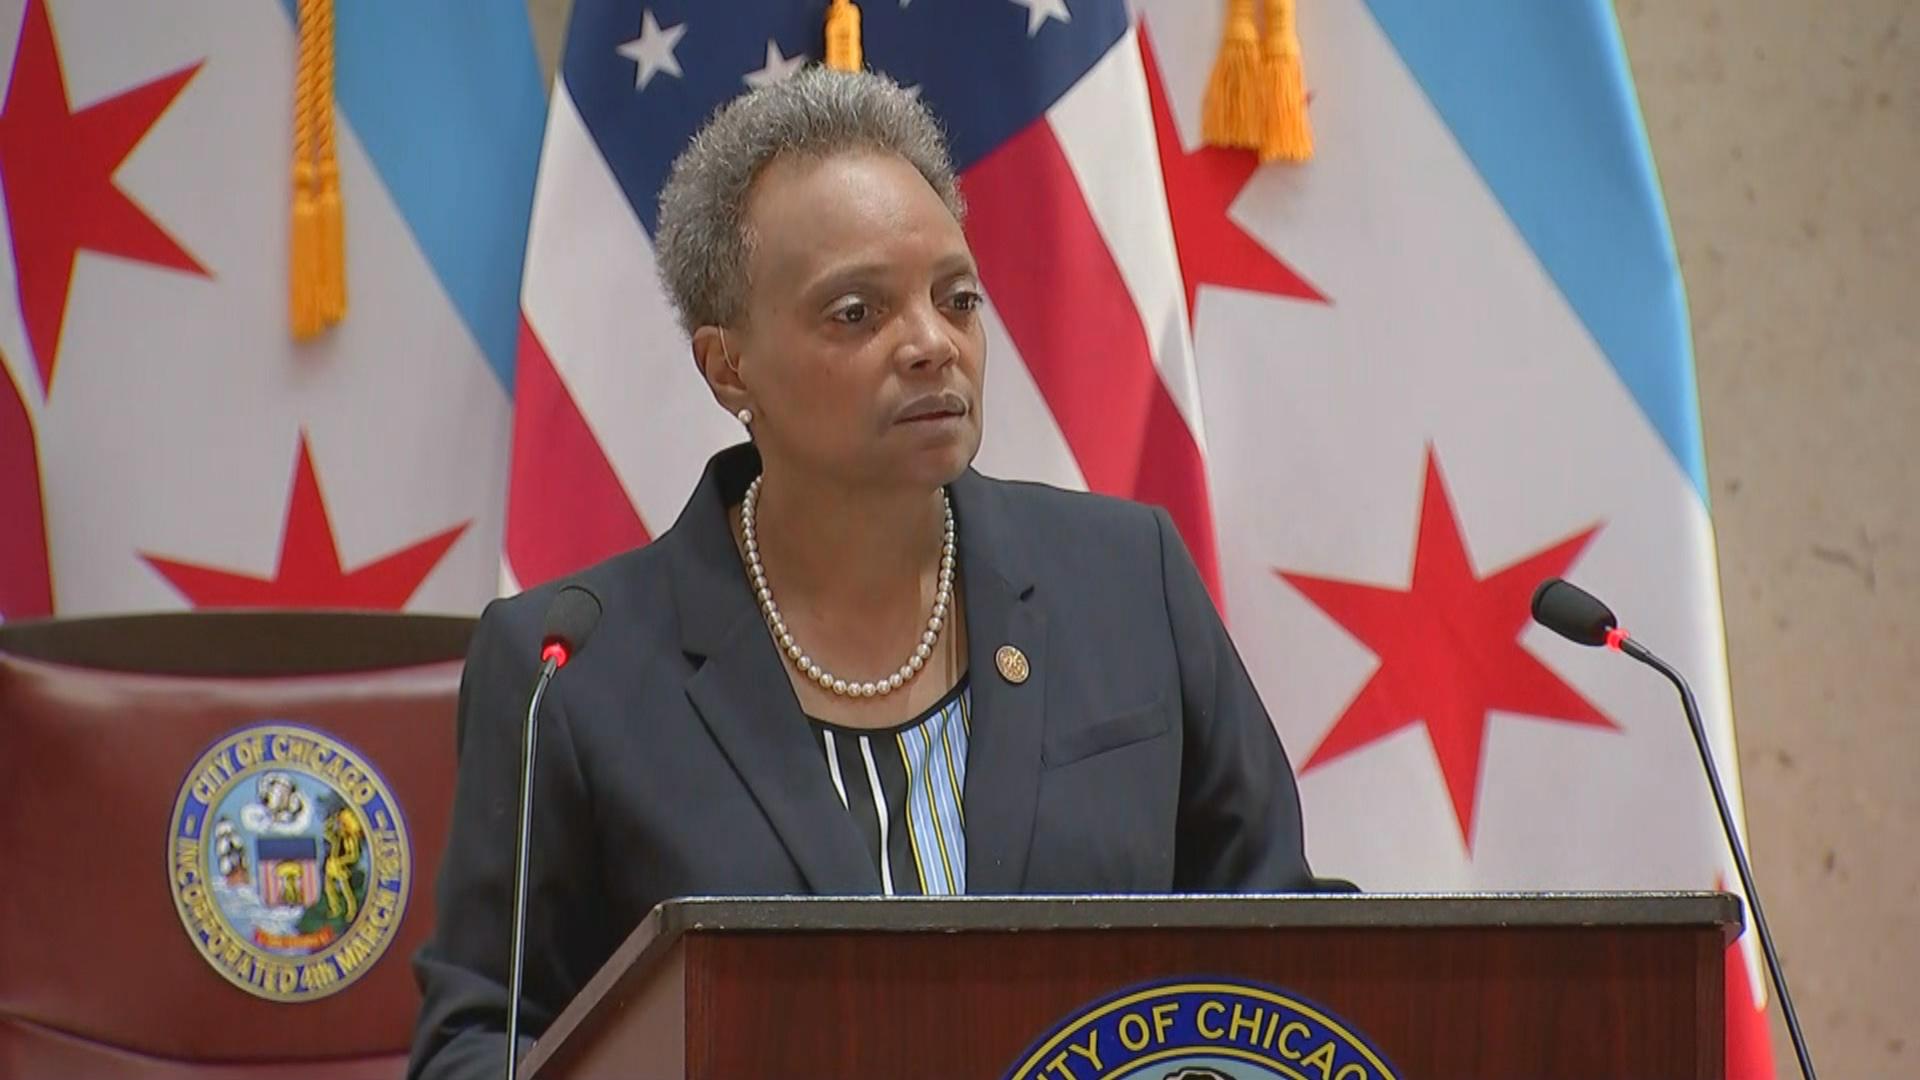 Mayor Lori Lightfoot delivers her budget address on Wednesday, Oct. 21, 2020. (WTTW News)